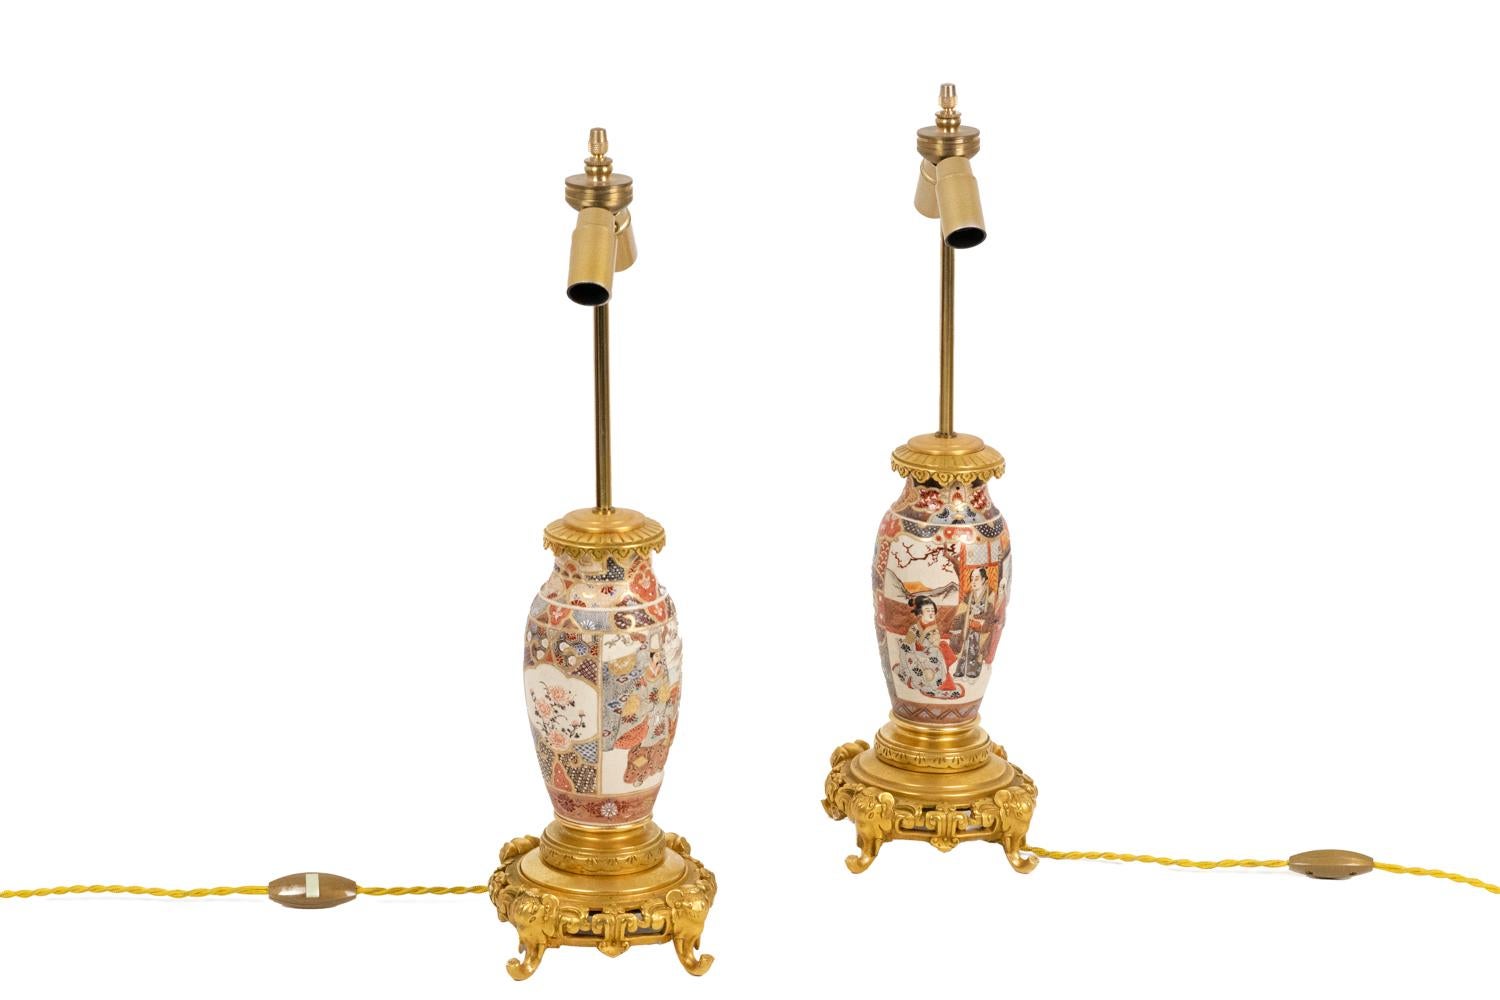 Pair of small baluster shape lamps in Satsuma earthenware decorated with polychrome enamels on a white background.
Decor of palace scenes with many Asian characters on landscape, wall hangings and palace decor and cartouches with flowers decor.